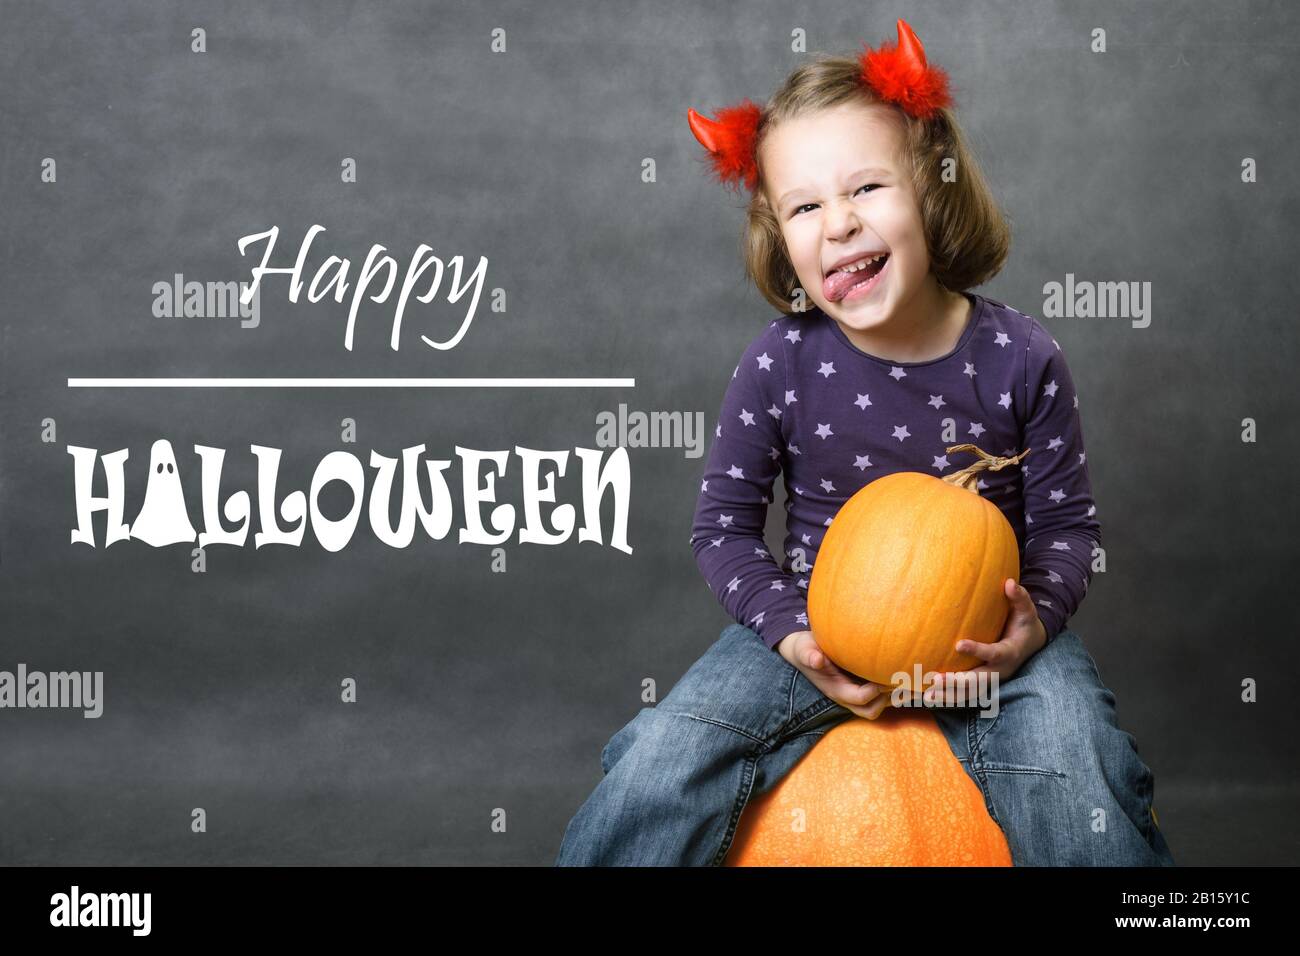 Happy Halloween! Little girl with costume horns having fun. Adorable child with pumpkin and Halloween typography. Cute toddler smiles and shows tongue Stock Photo